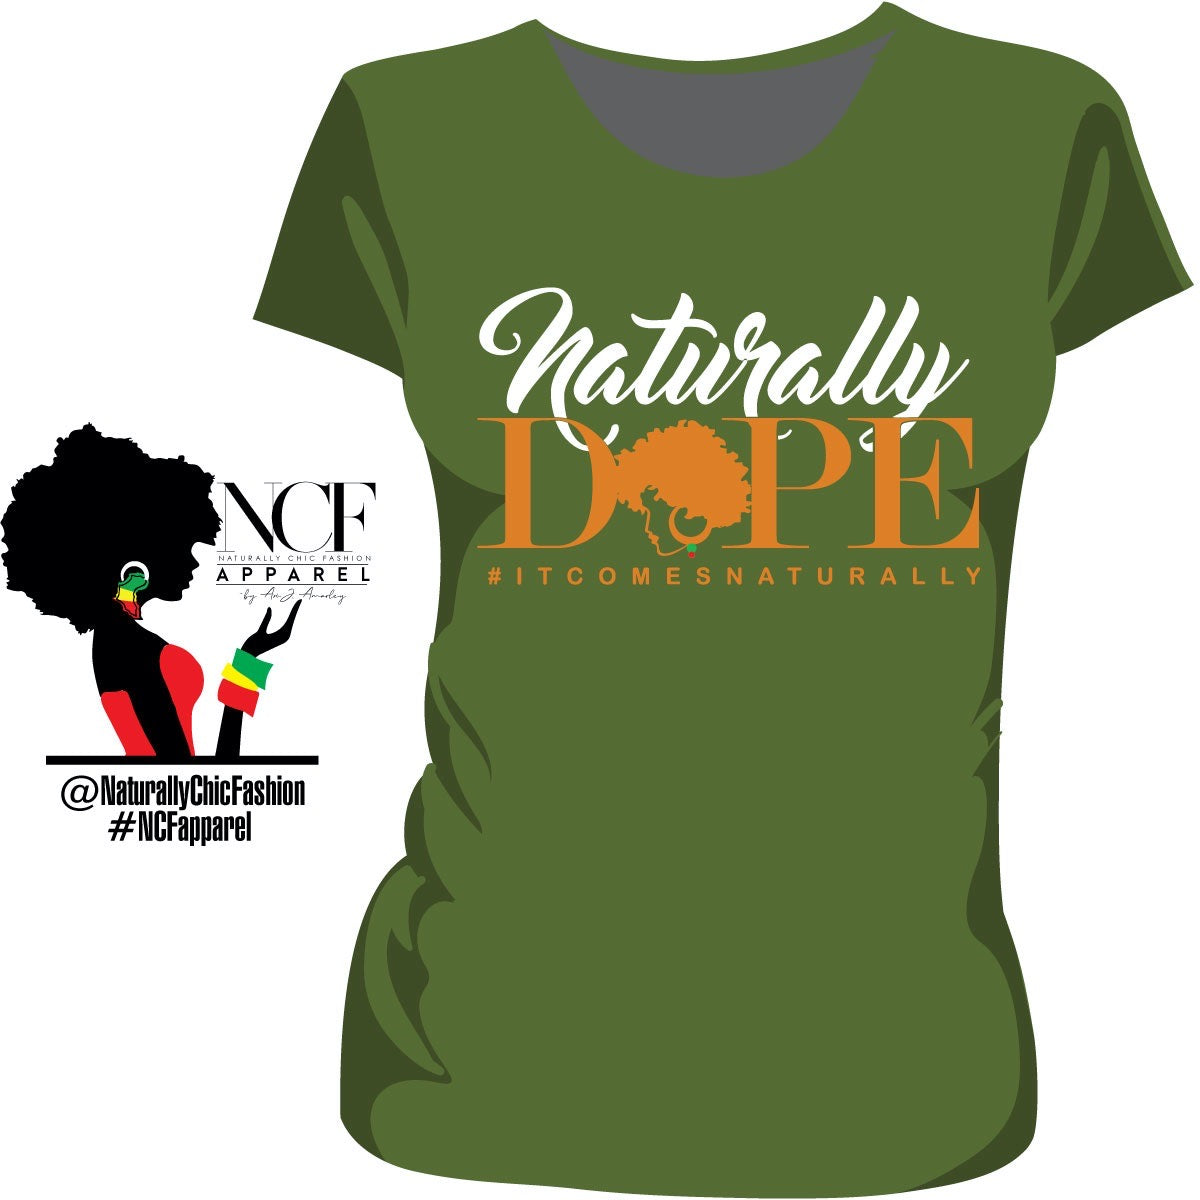 NCF • NATURALLY DOPE | Olive Green Ladies Tees (bre)